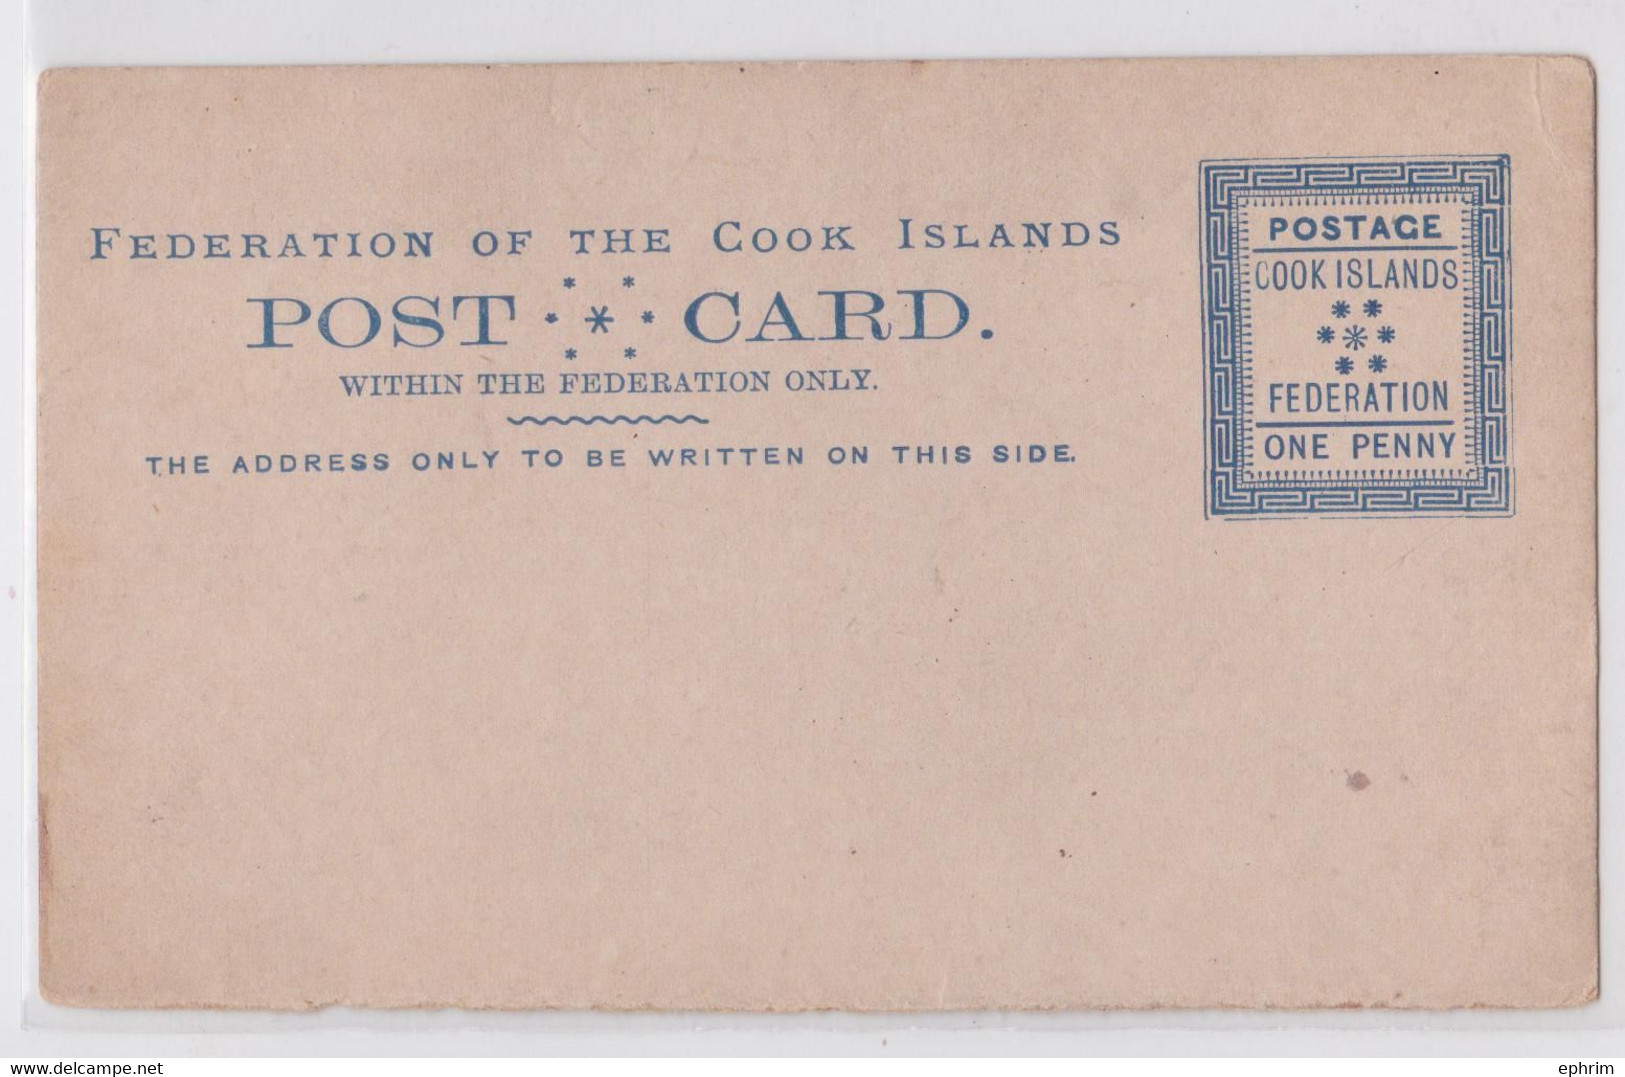 COOK ISLANDS FEDERATION ONE PENNY POSTAL STATIONERY POST CARD ENTIER CARTE POSTALE ÎLES COOK PS EP - Cookeilanden